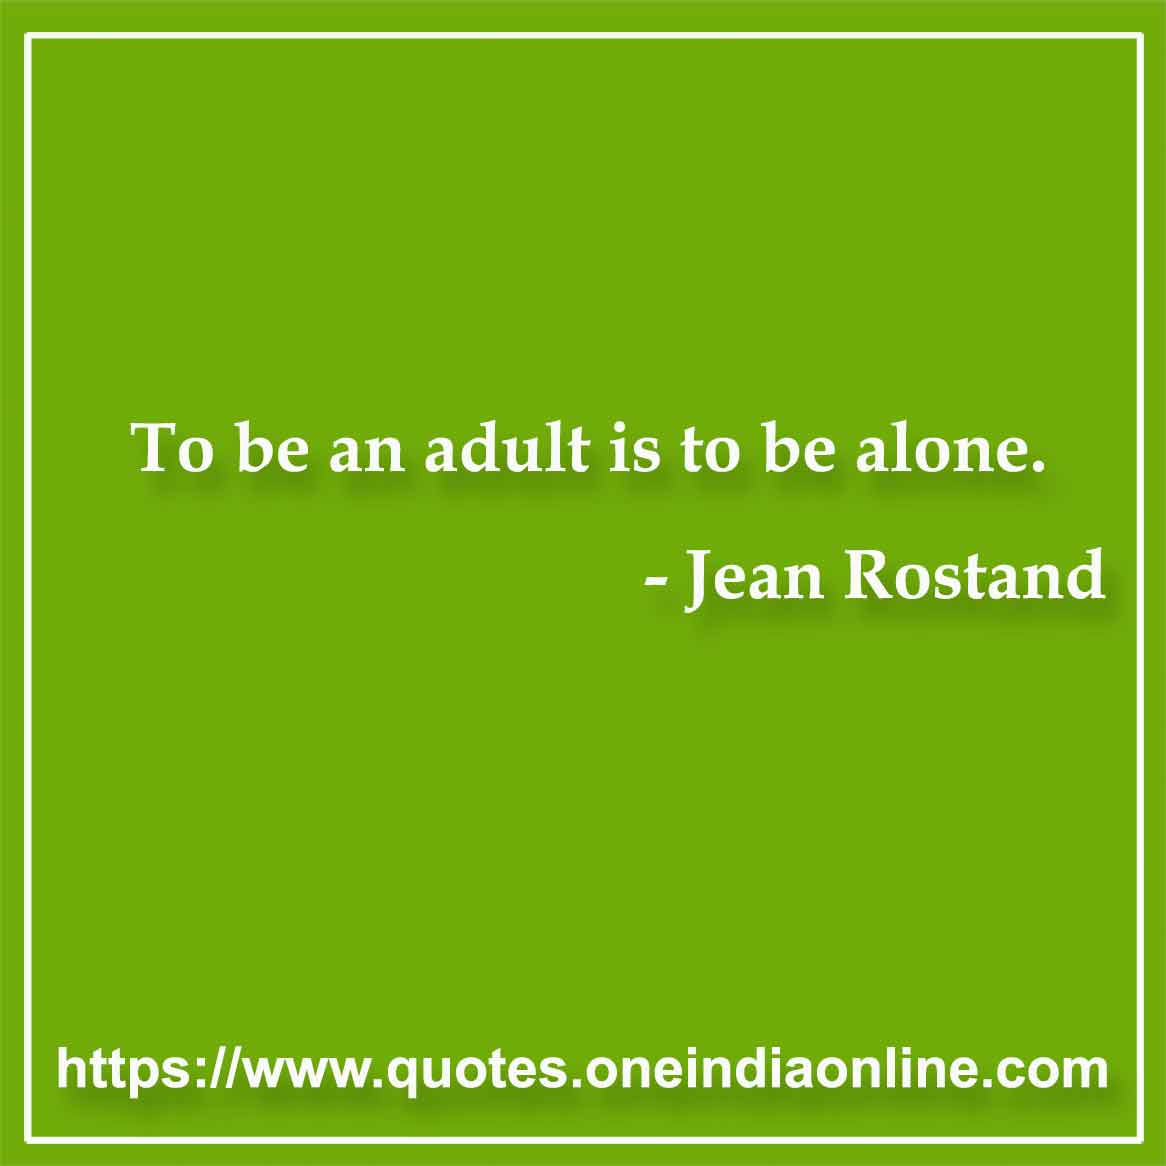 To be an adult is to be alone.

- Loneliness Quotes by Jean Rostand